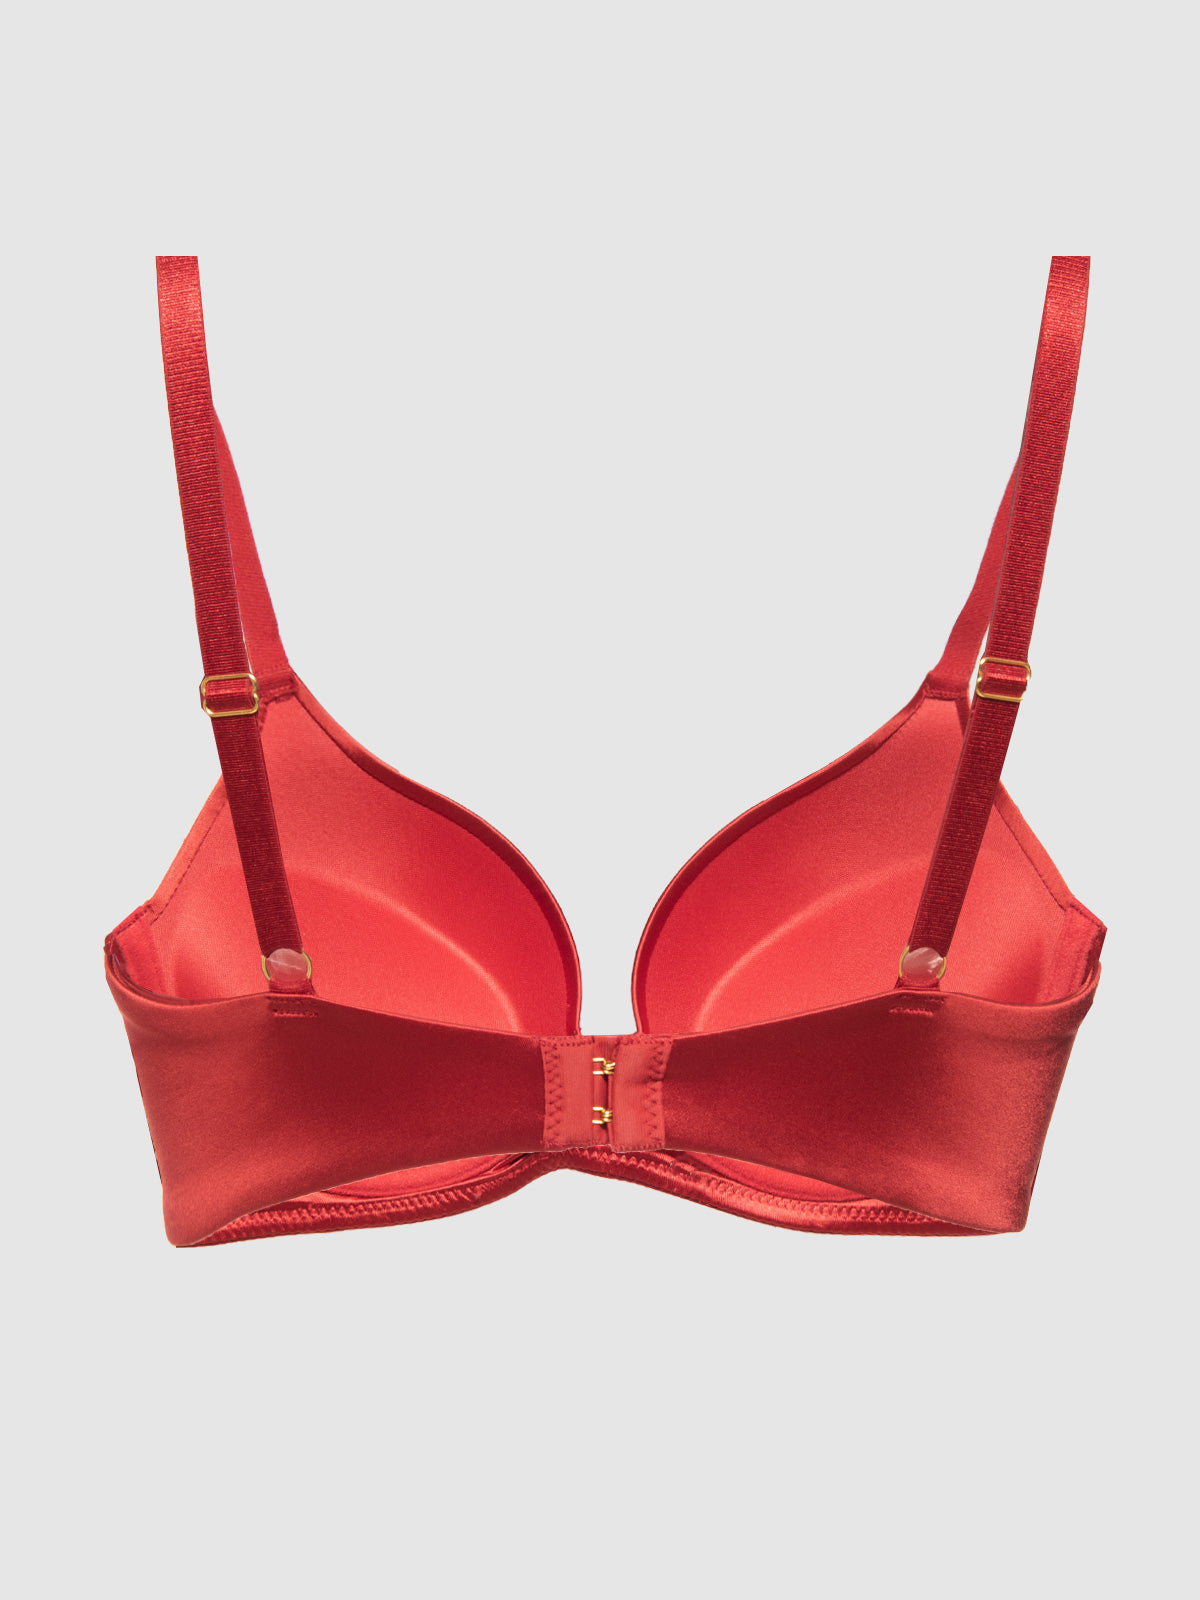 Alexie Mesh & Satin Open Cup Bra - Fredericks of Hollywood